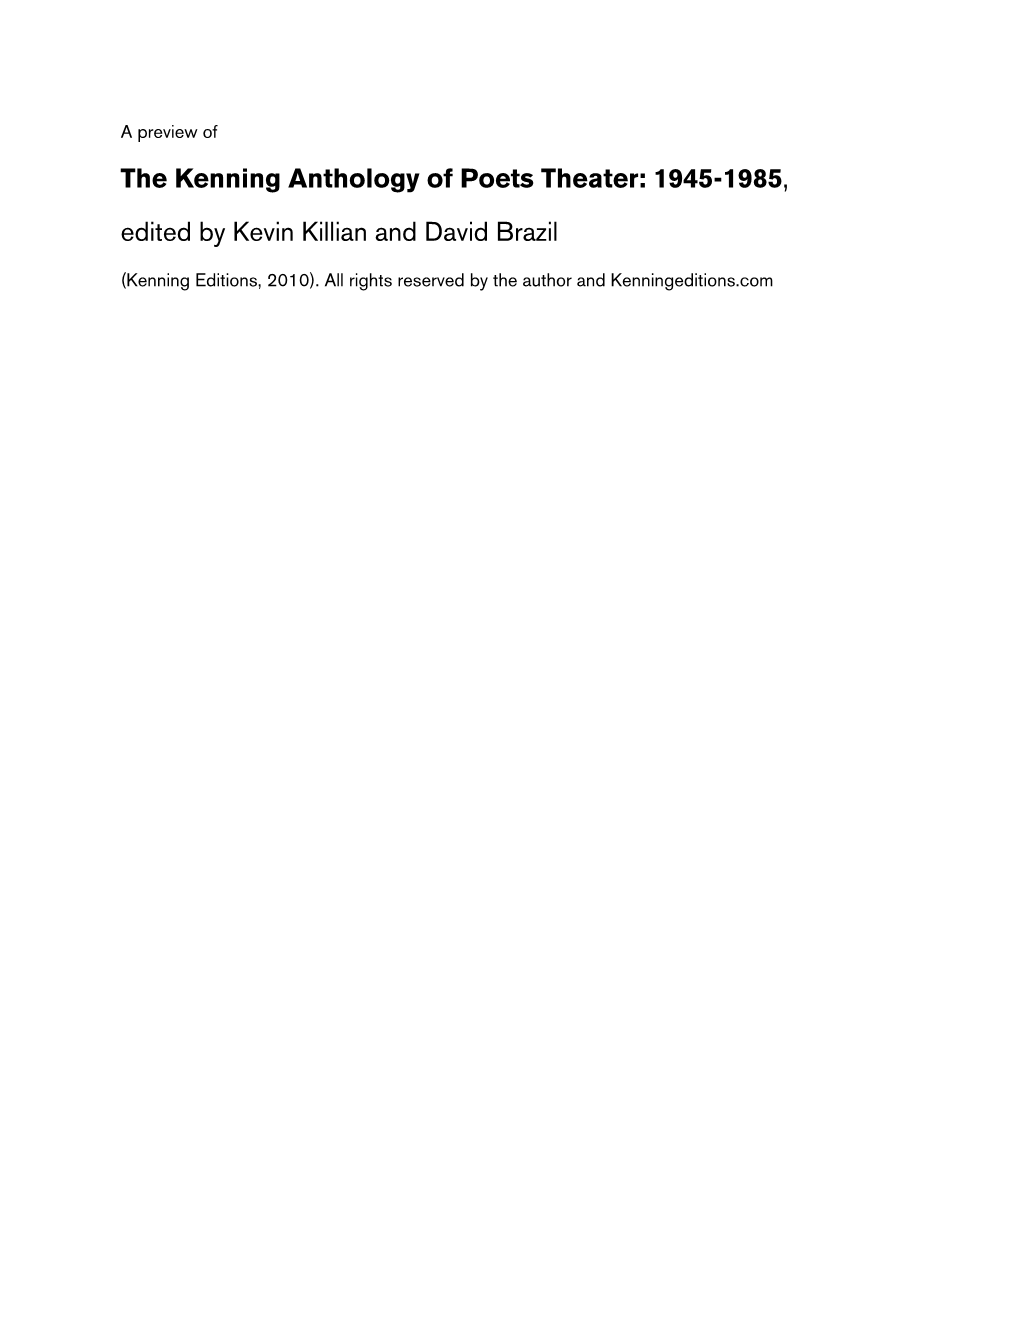 The Kenning Anthology of Poets Theater: 1945-1985, Edited by Kevin Killian and David Brazil